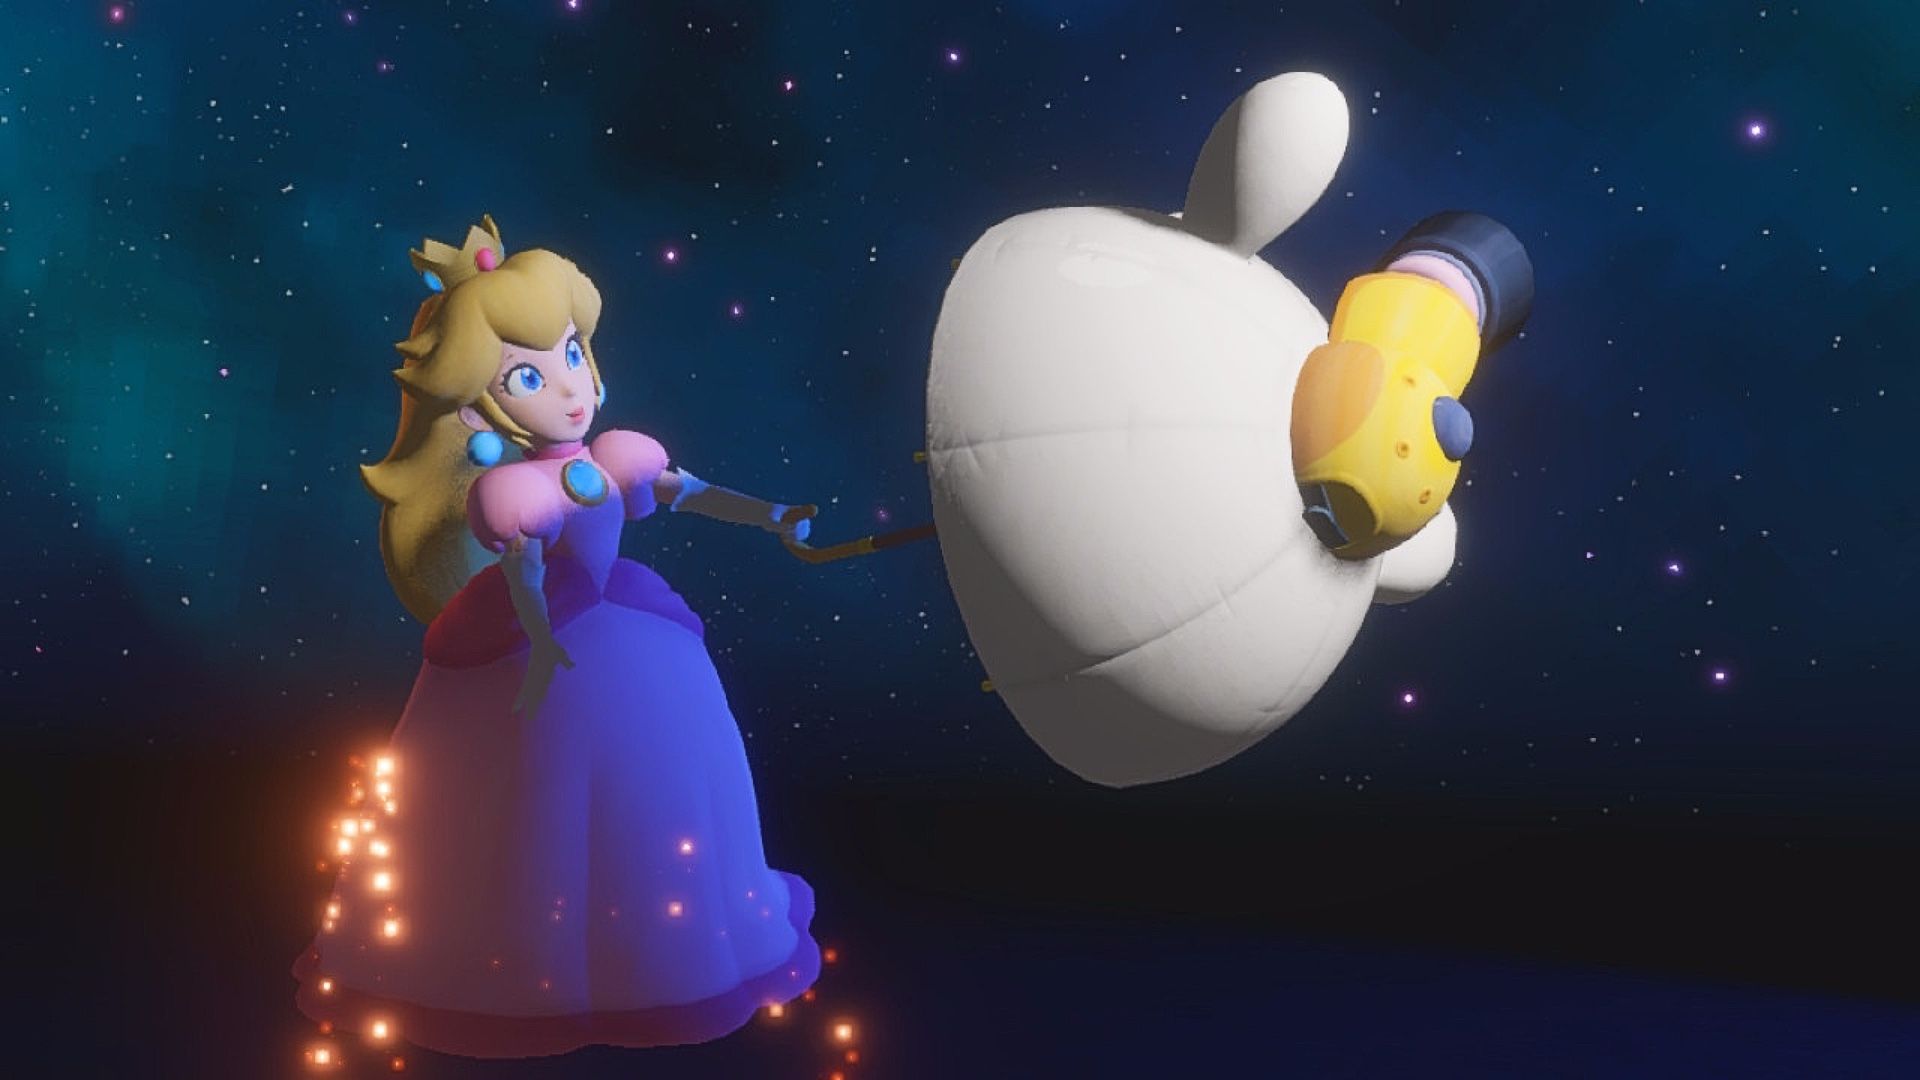 princess peach uses her boombrella whilst floating in front of a galaxy backdrop in Mario + Rabbids Sparks Of Hope